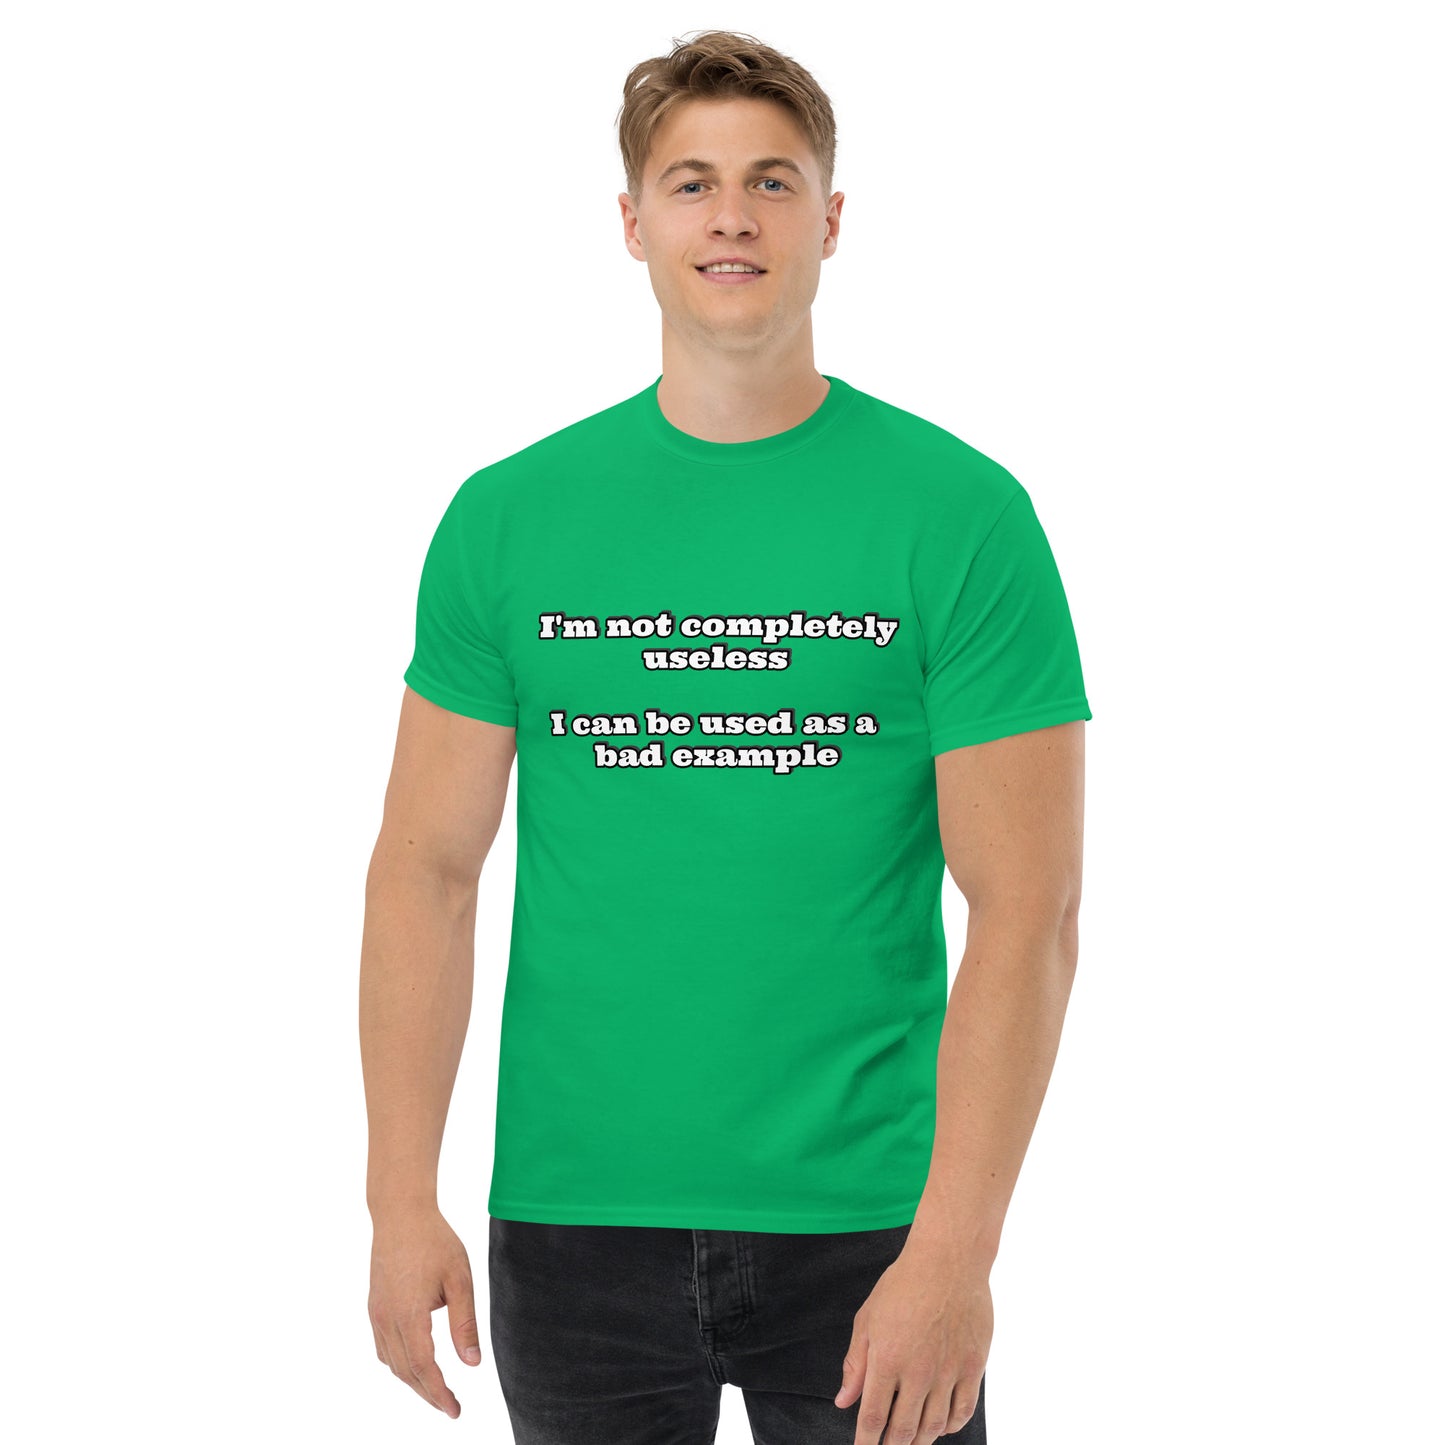 Men with Irish green t-shirt with text “I'm not completely useless I can be used as a bad example”